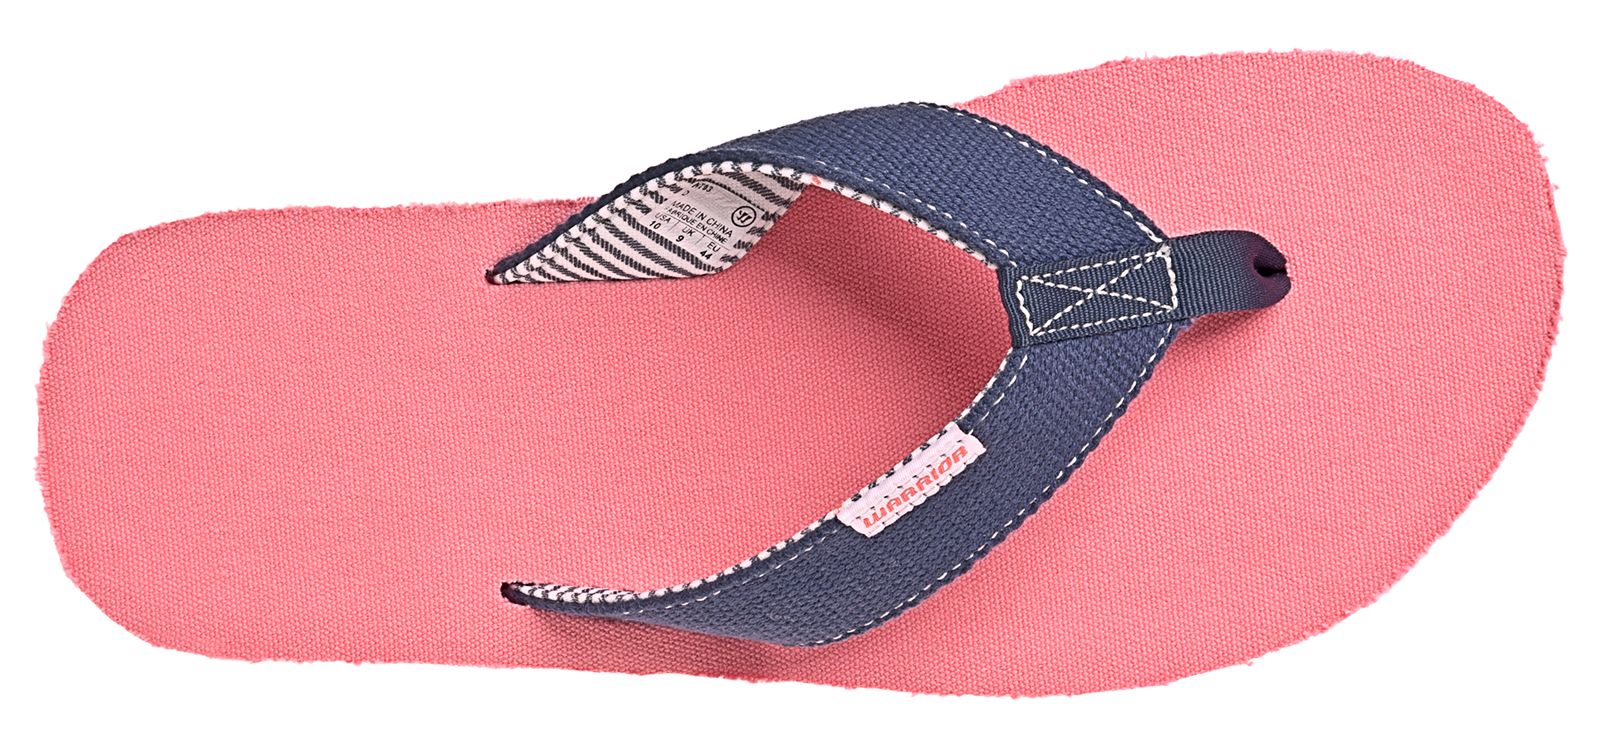 Swag Thong Sandal, Navy with Pink image number 0